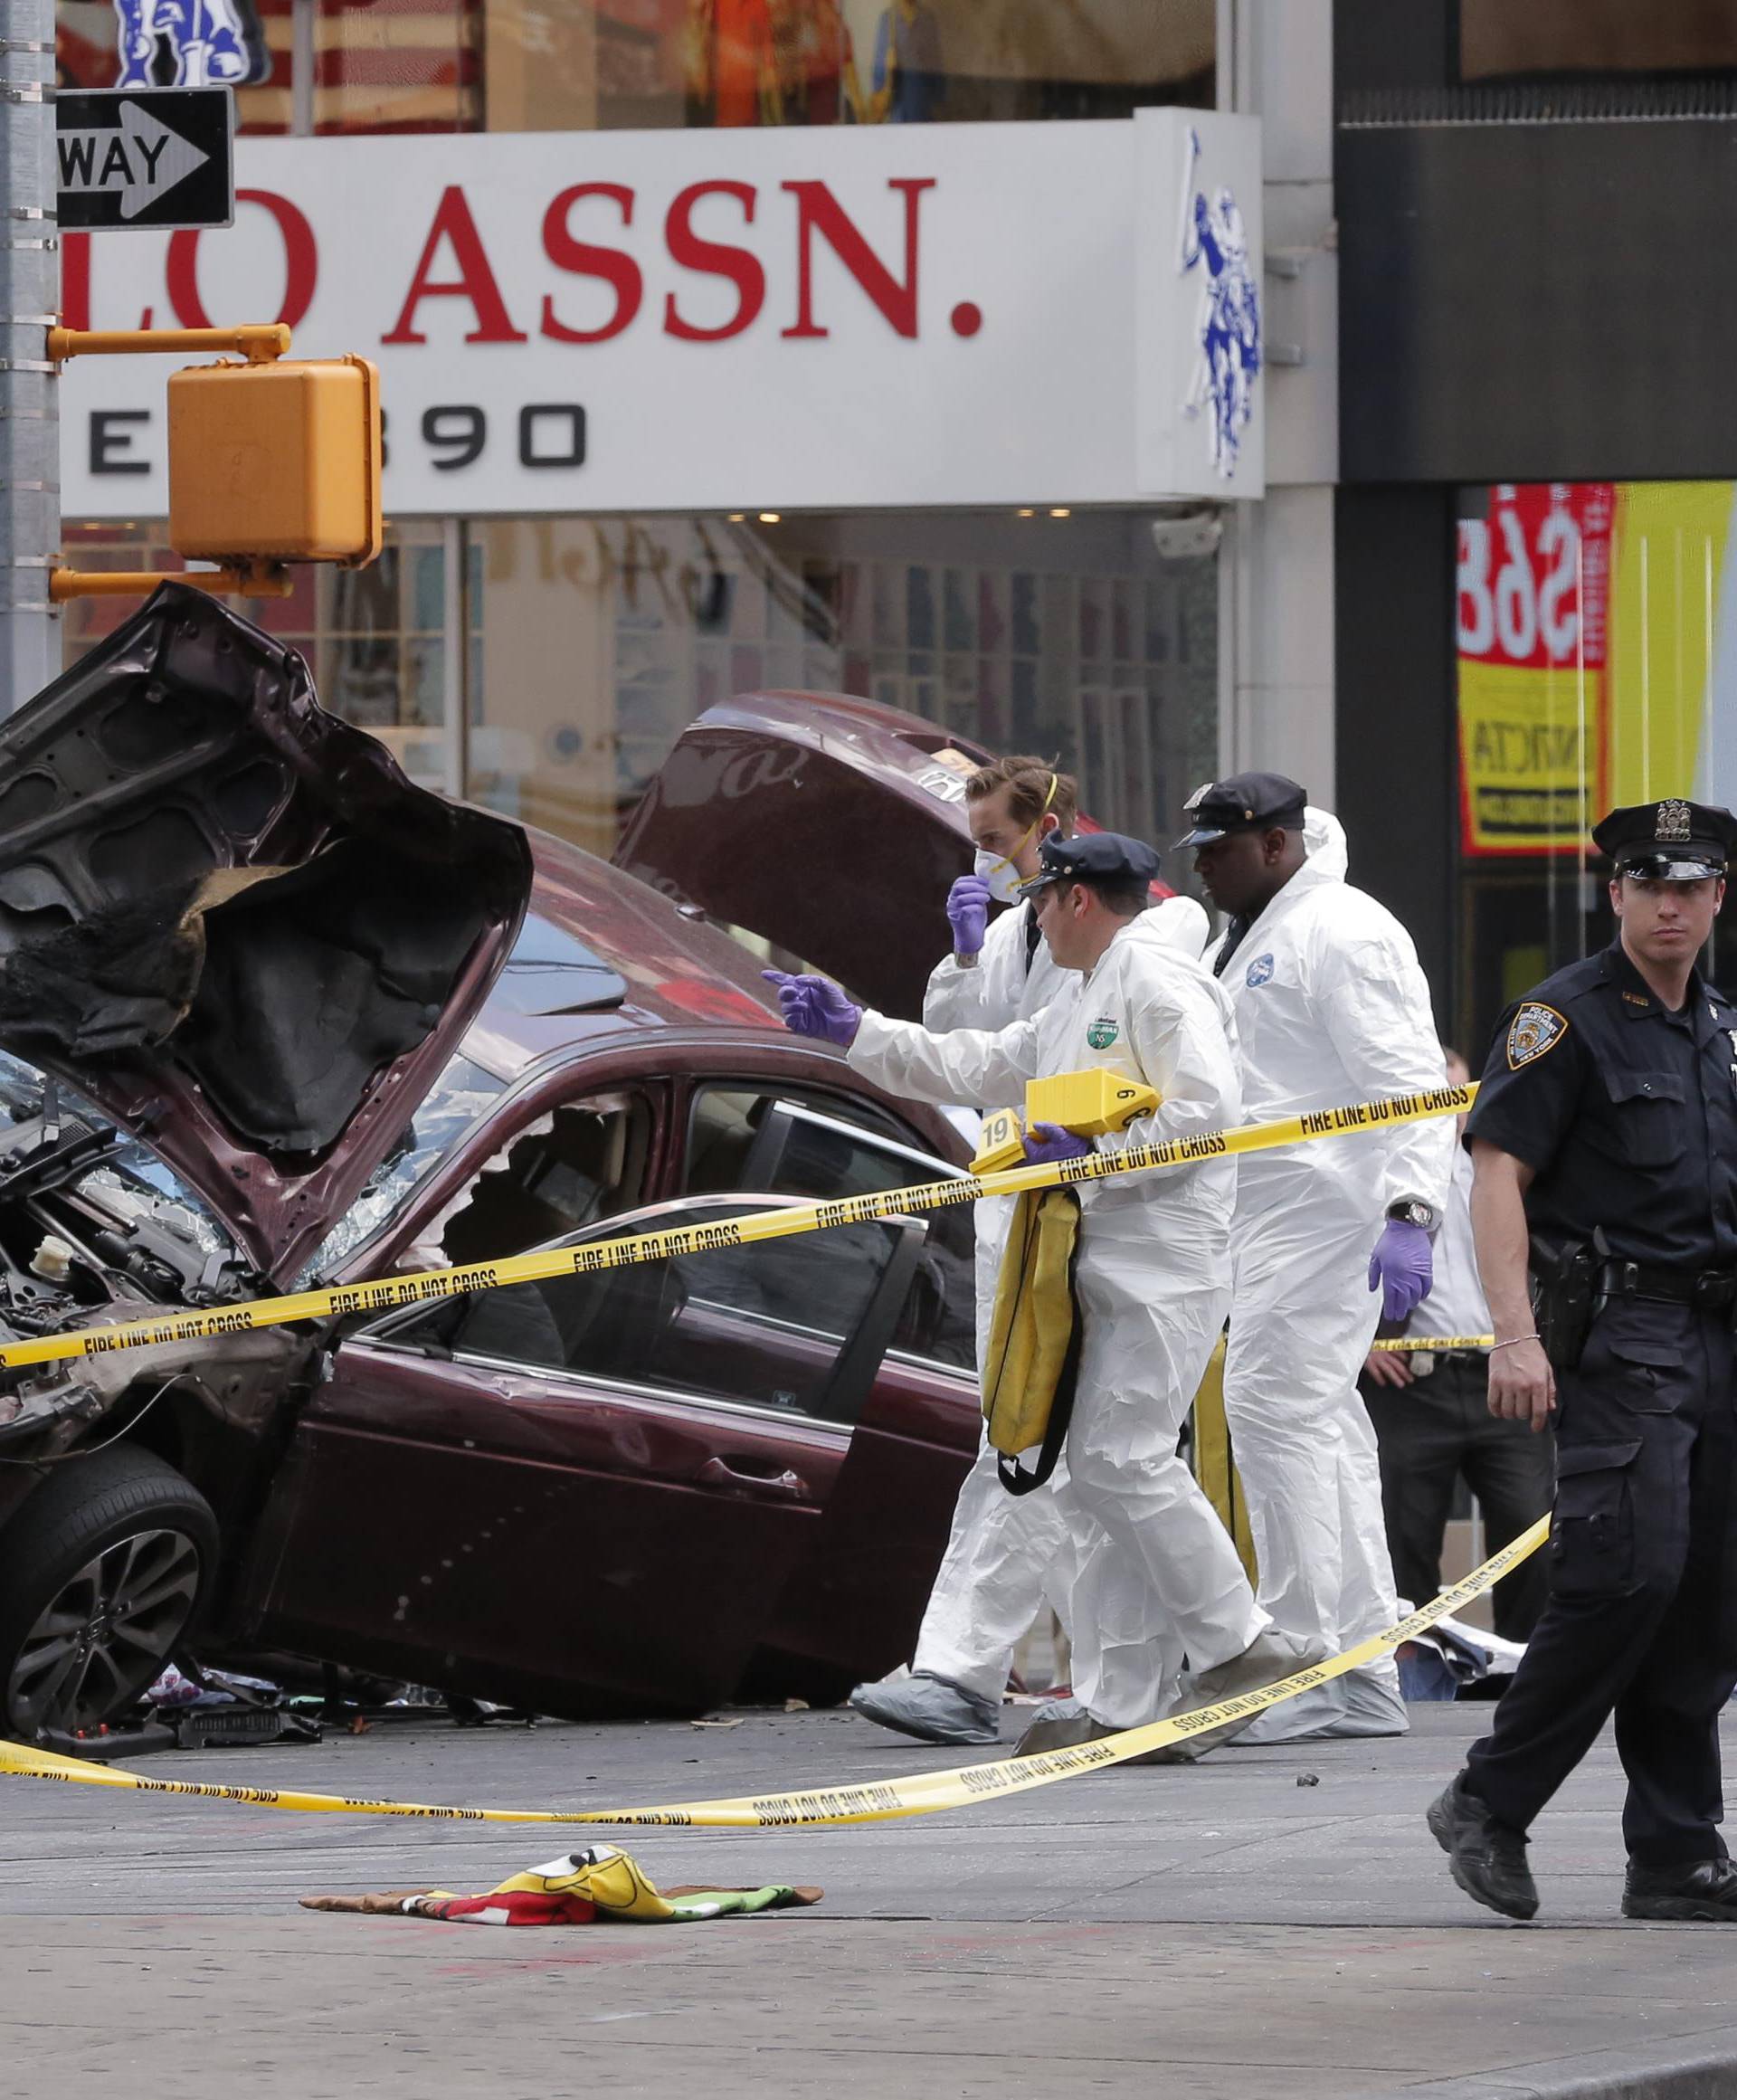 The remains of a vehicle involved in crash are cordoned off in Times Square in New York